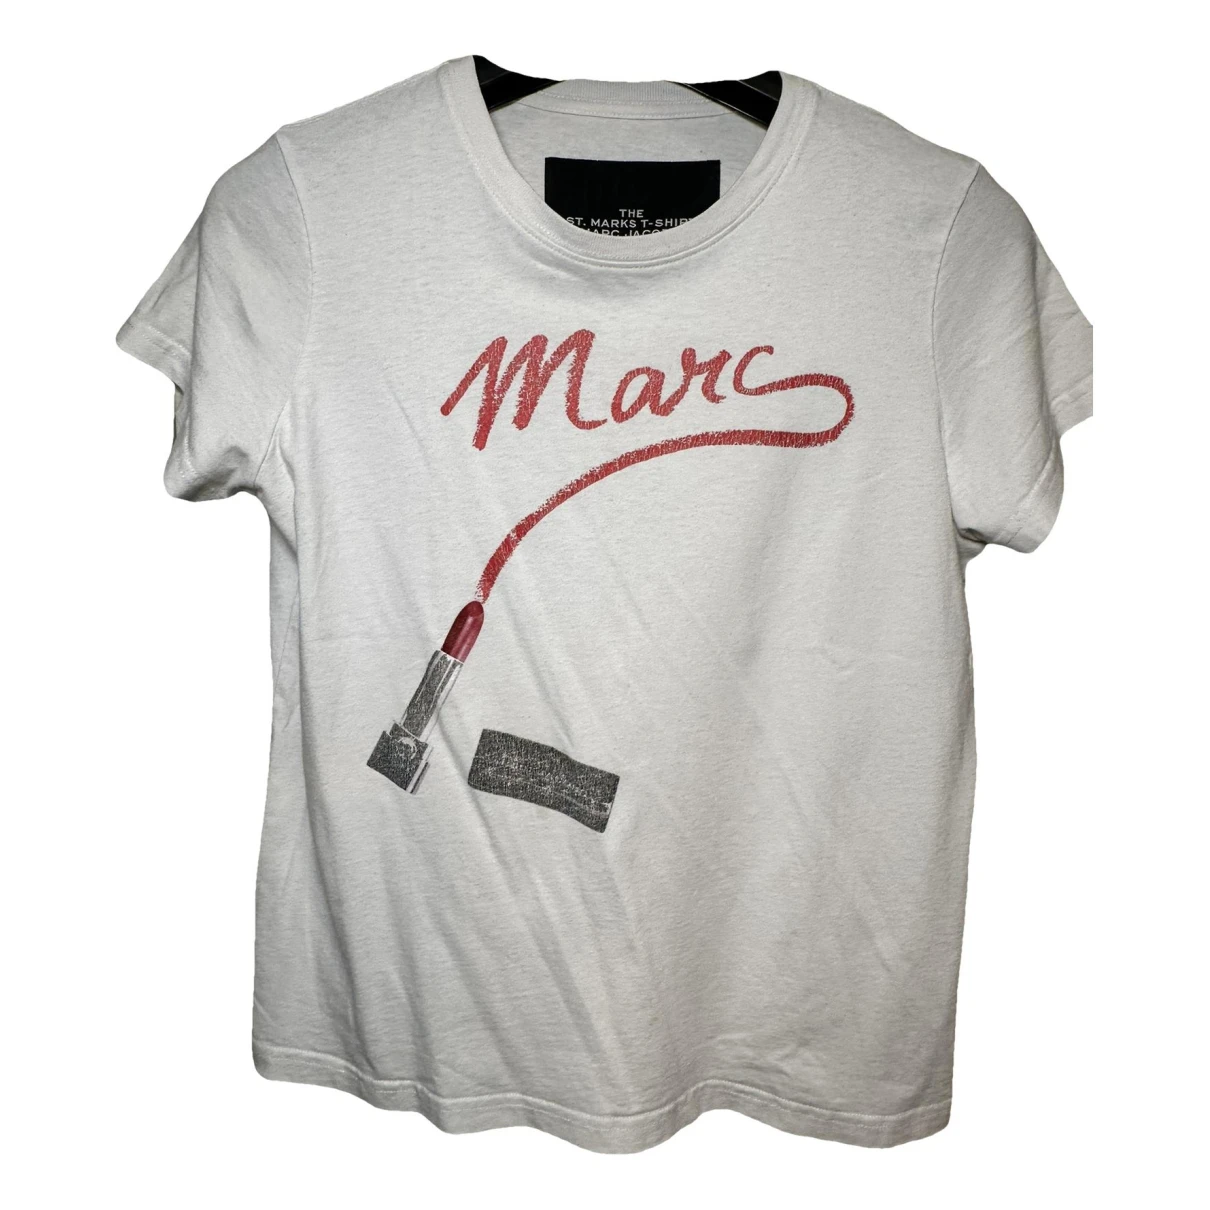 Pre-owned Marc Jacobs T-shirt In White